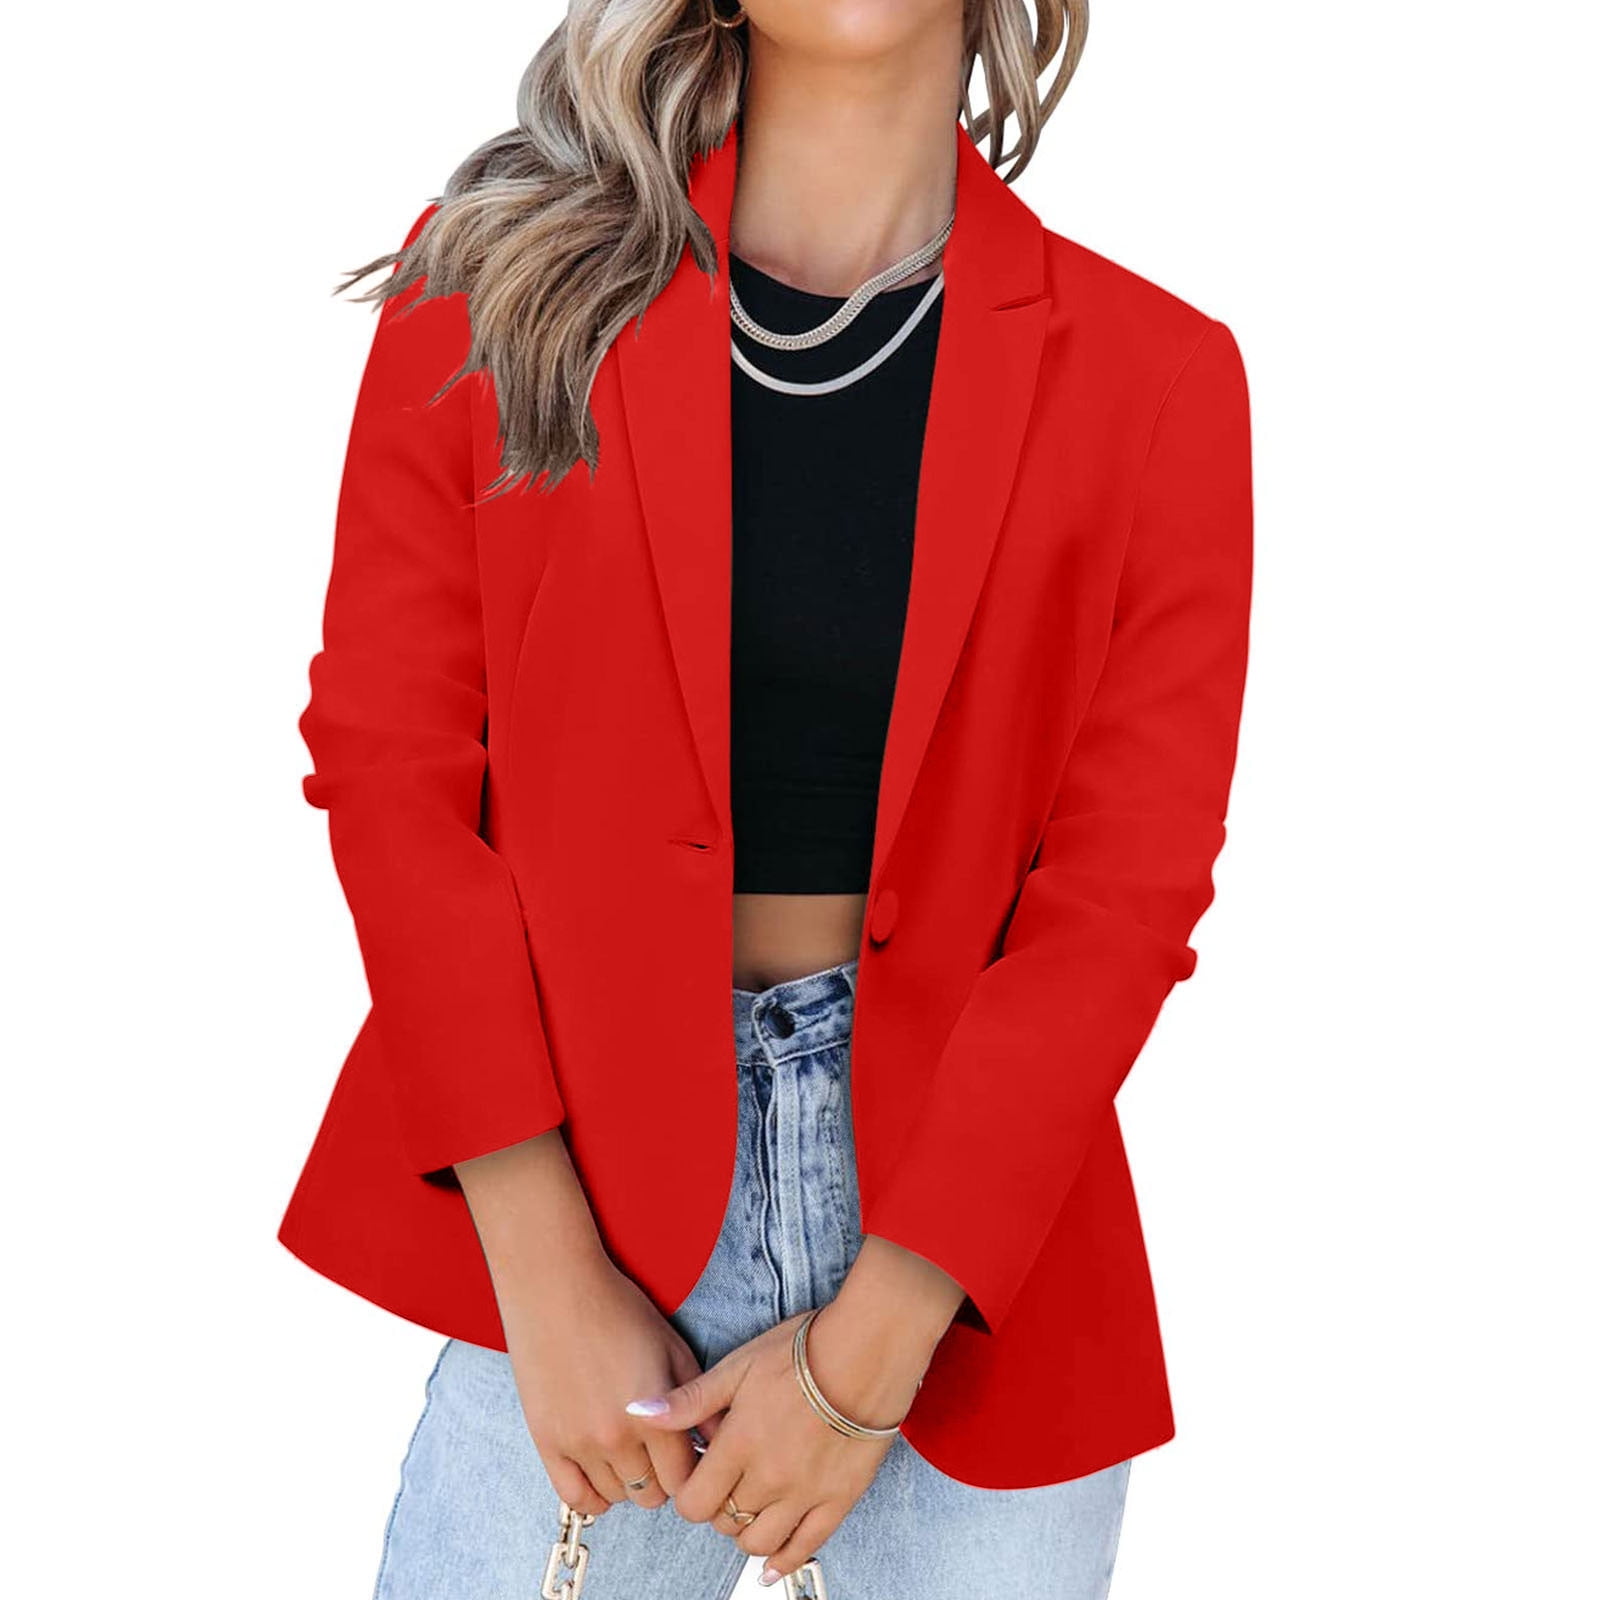 Teissuly Women's Casual Blazer Jackets Suit Long Sleeve Open Front With ...